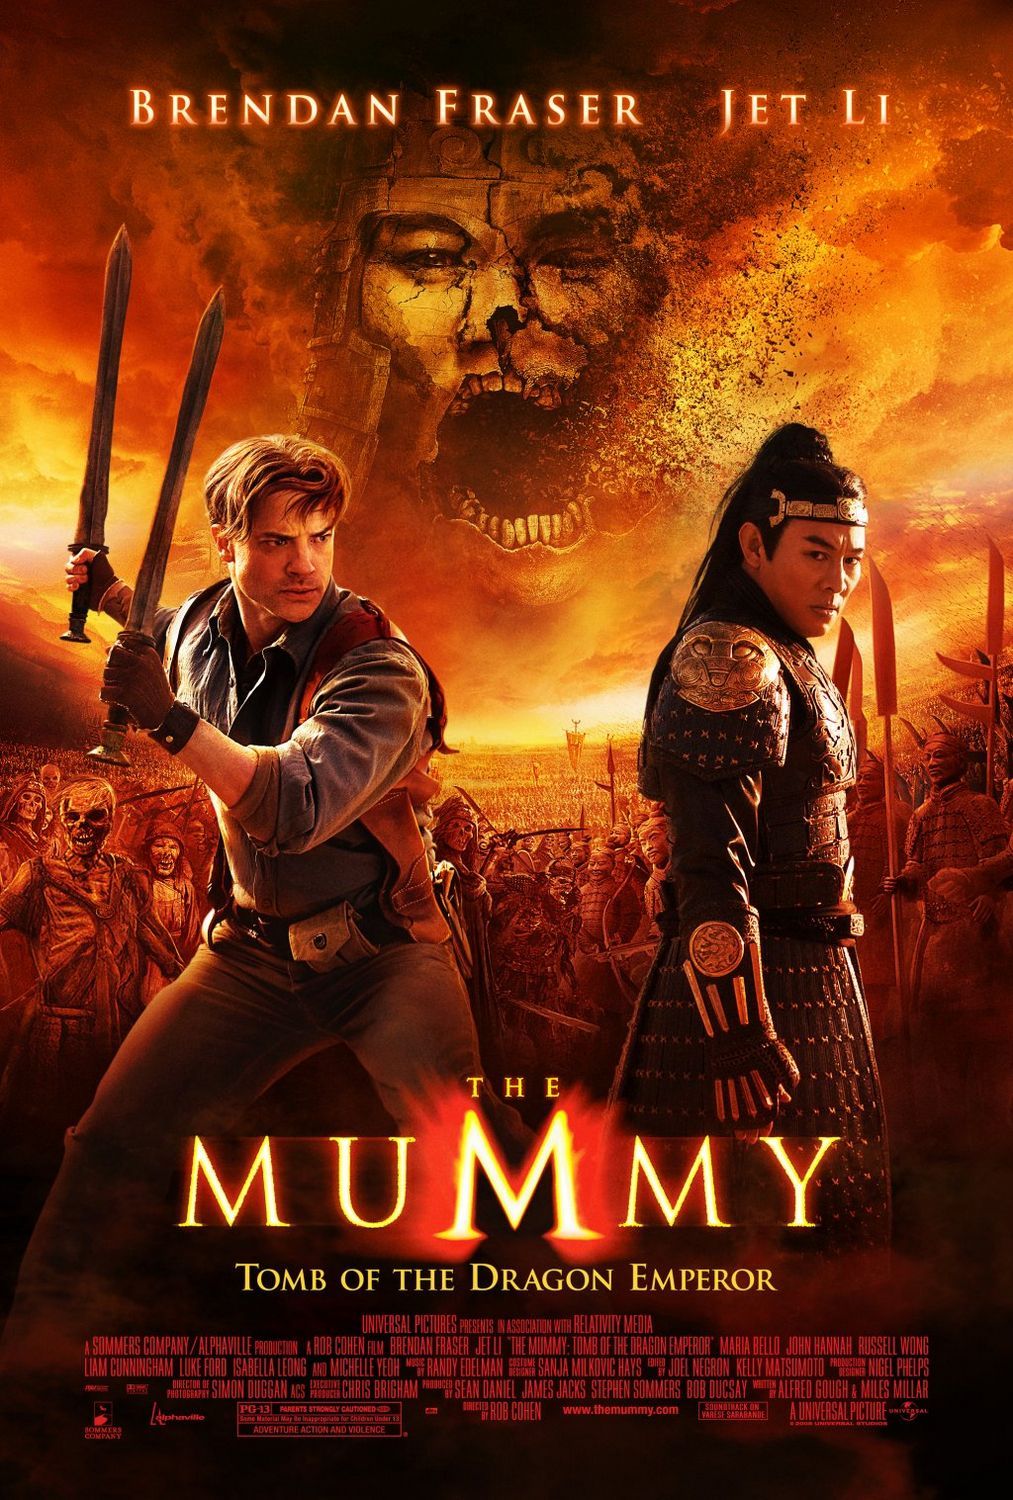 The Mummy Tomb of the Dragon Emperor Movie Poster